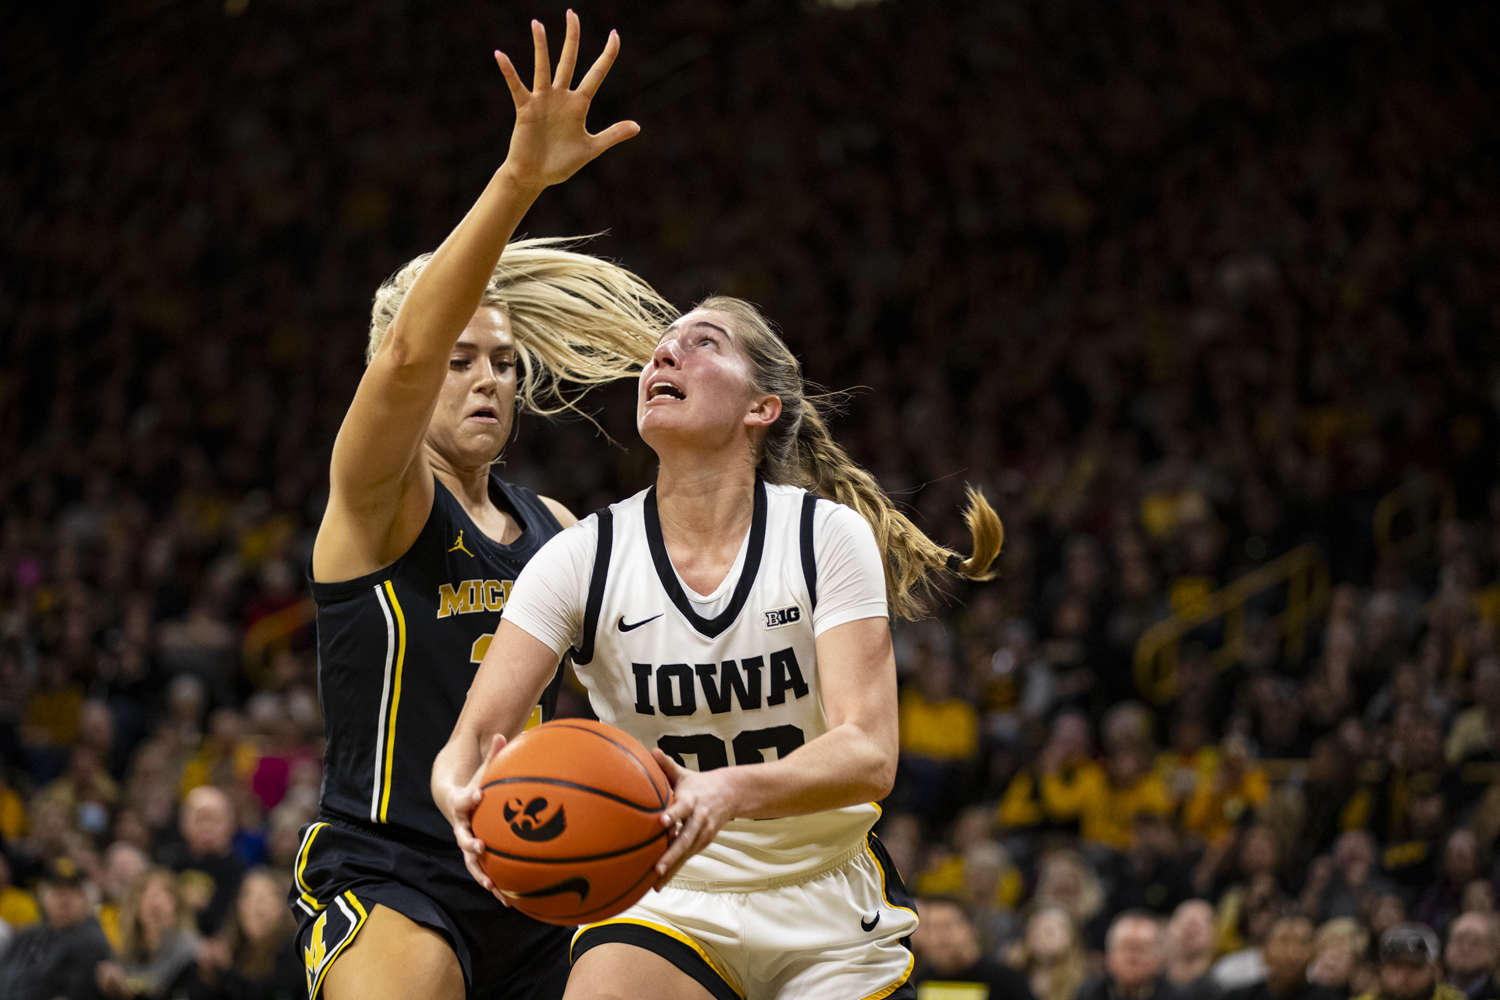 Iowa guard Kate Martin prepares to shoot the ball during a women’s basketball game between No. 4 Iowa and Michigan at Carver-Hawkeye Arena on Thursday, Feb. 15, 2024. The Hawkeyes defeated the Wolverines, 106-89. (Ayrton Breckenridge/The Daily Iowan)